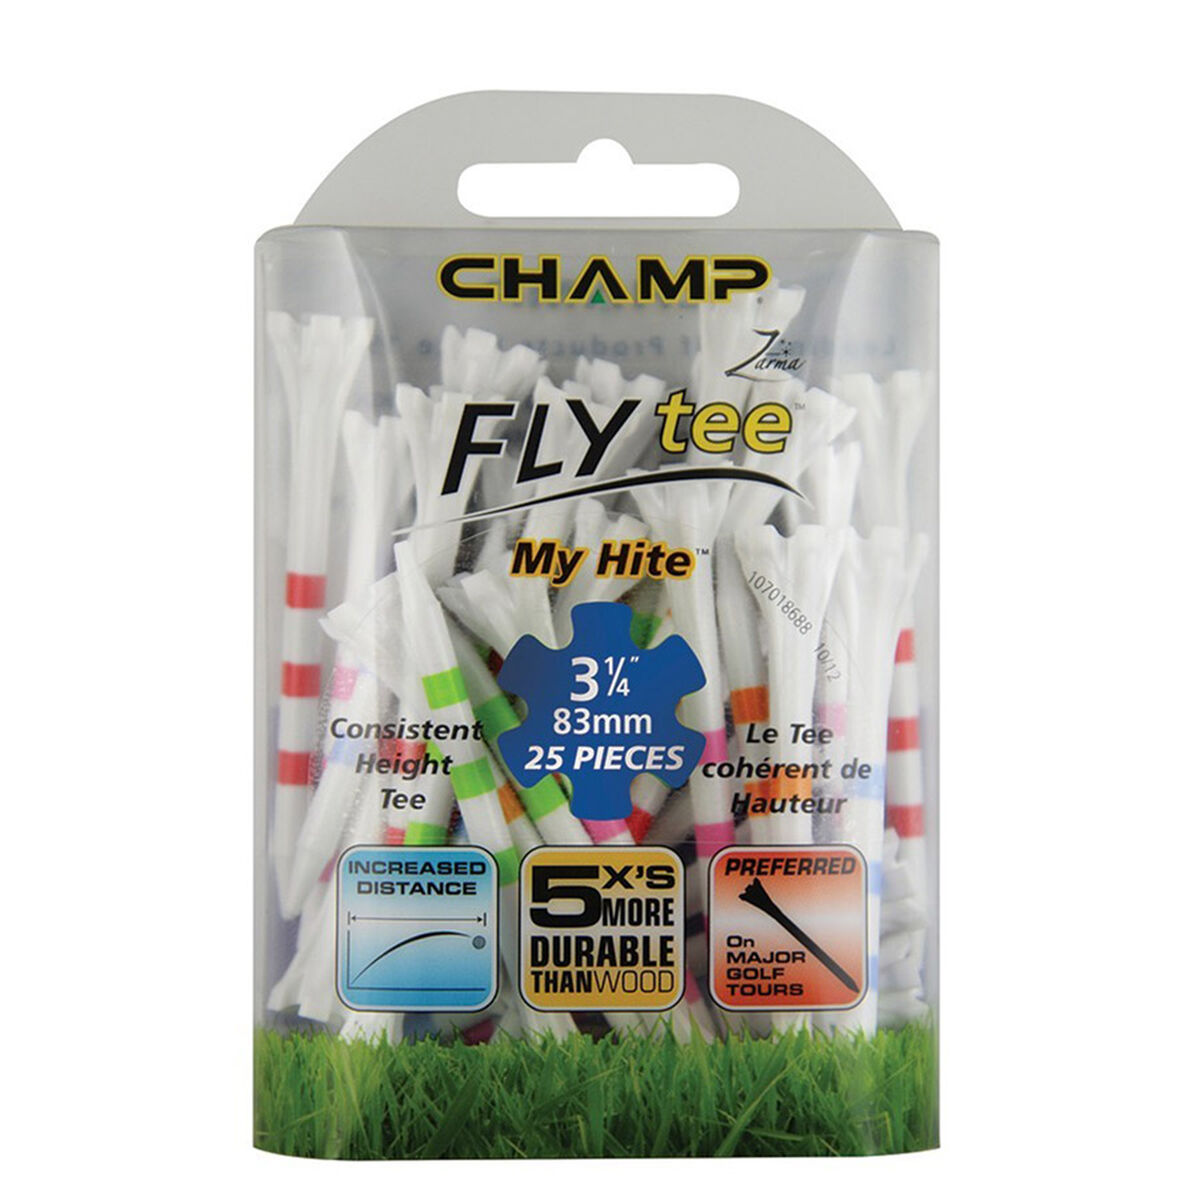 Champ White MyHite Fly Pack of 25 Golf Tees, Size: 83mm | American Golf